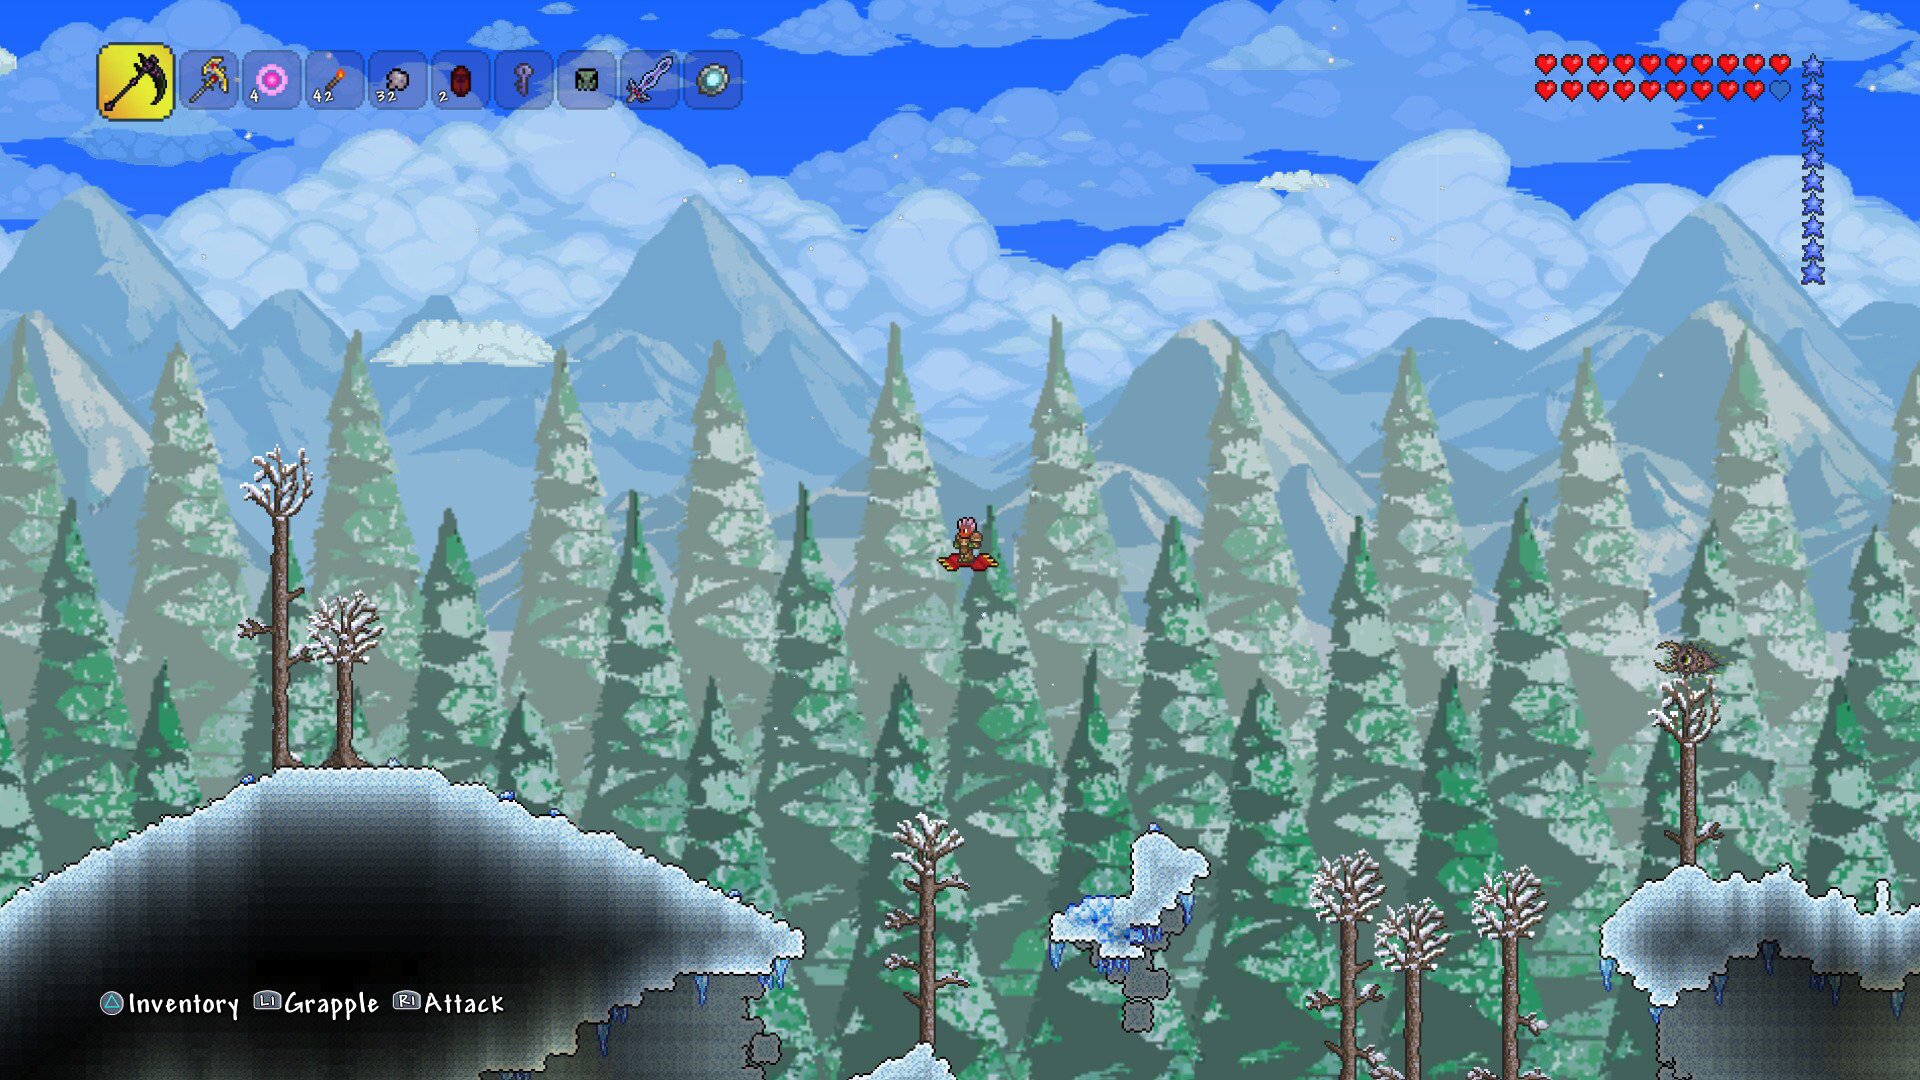 505 Games rules out Terraria for Wii U